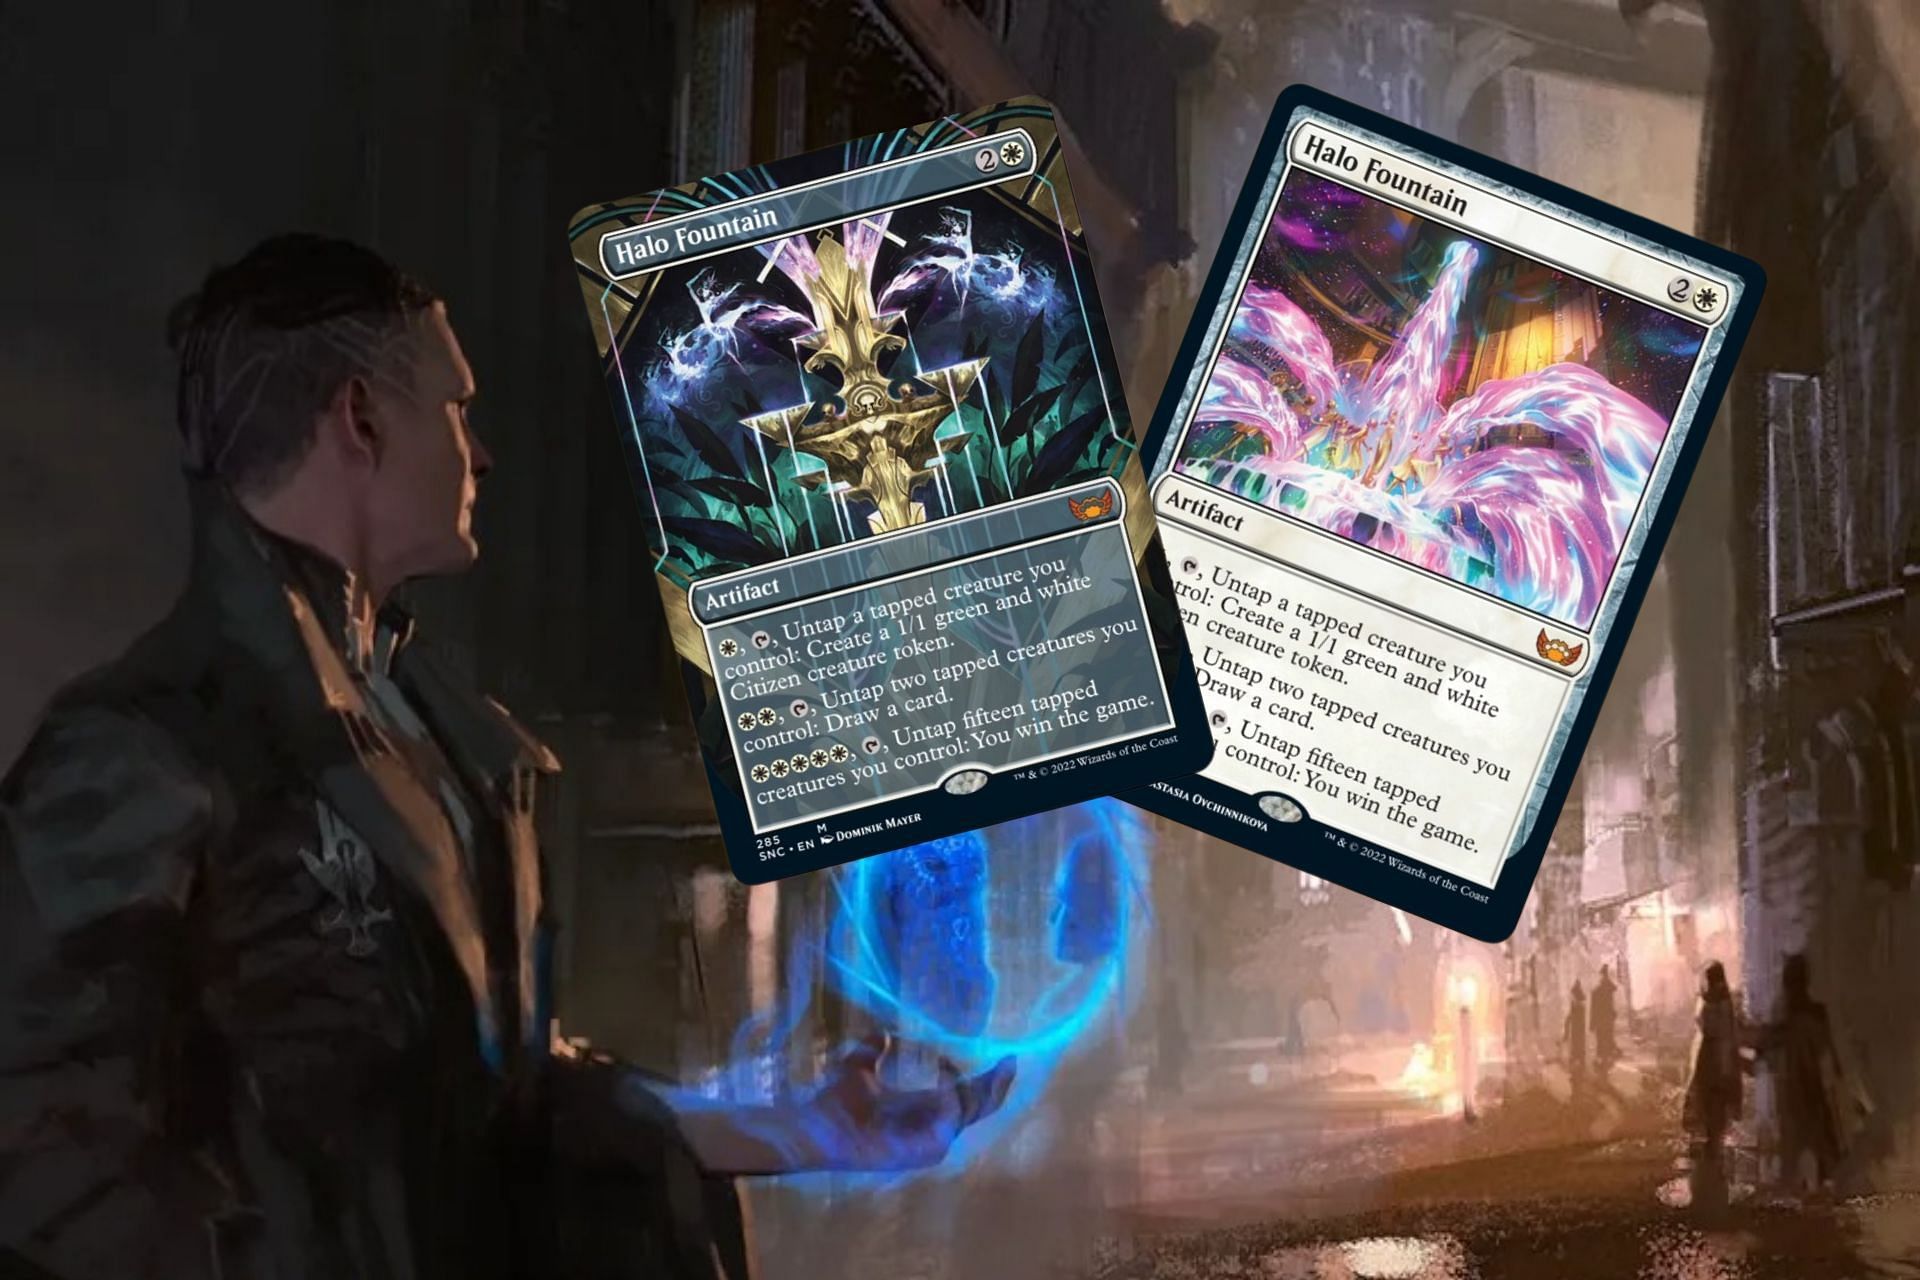 Magic: The Gathering has an incredible Mythic Rare revealed for Streets of New Capenna: Halo Fountain (Image via Sportskeeda)